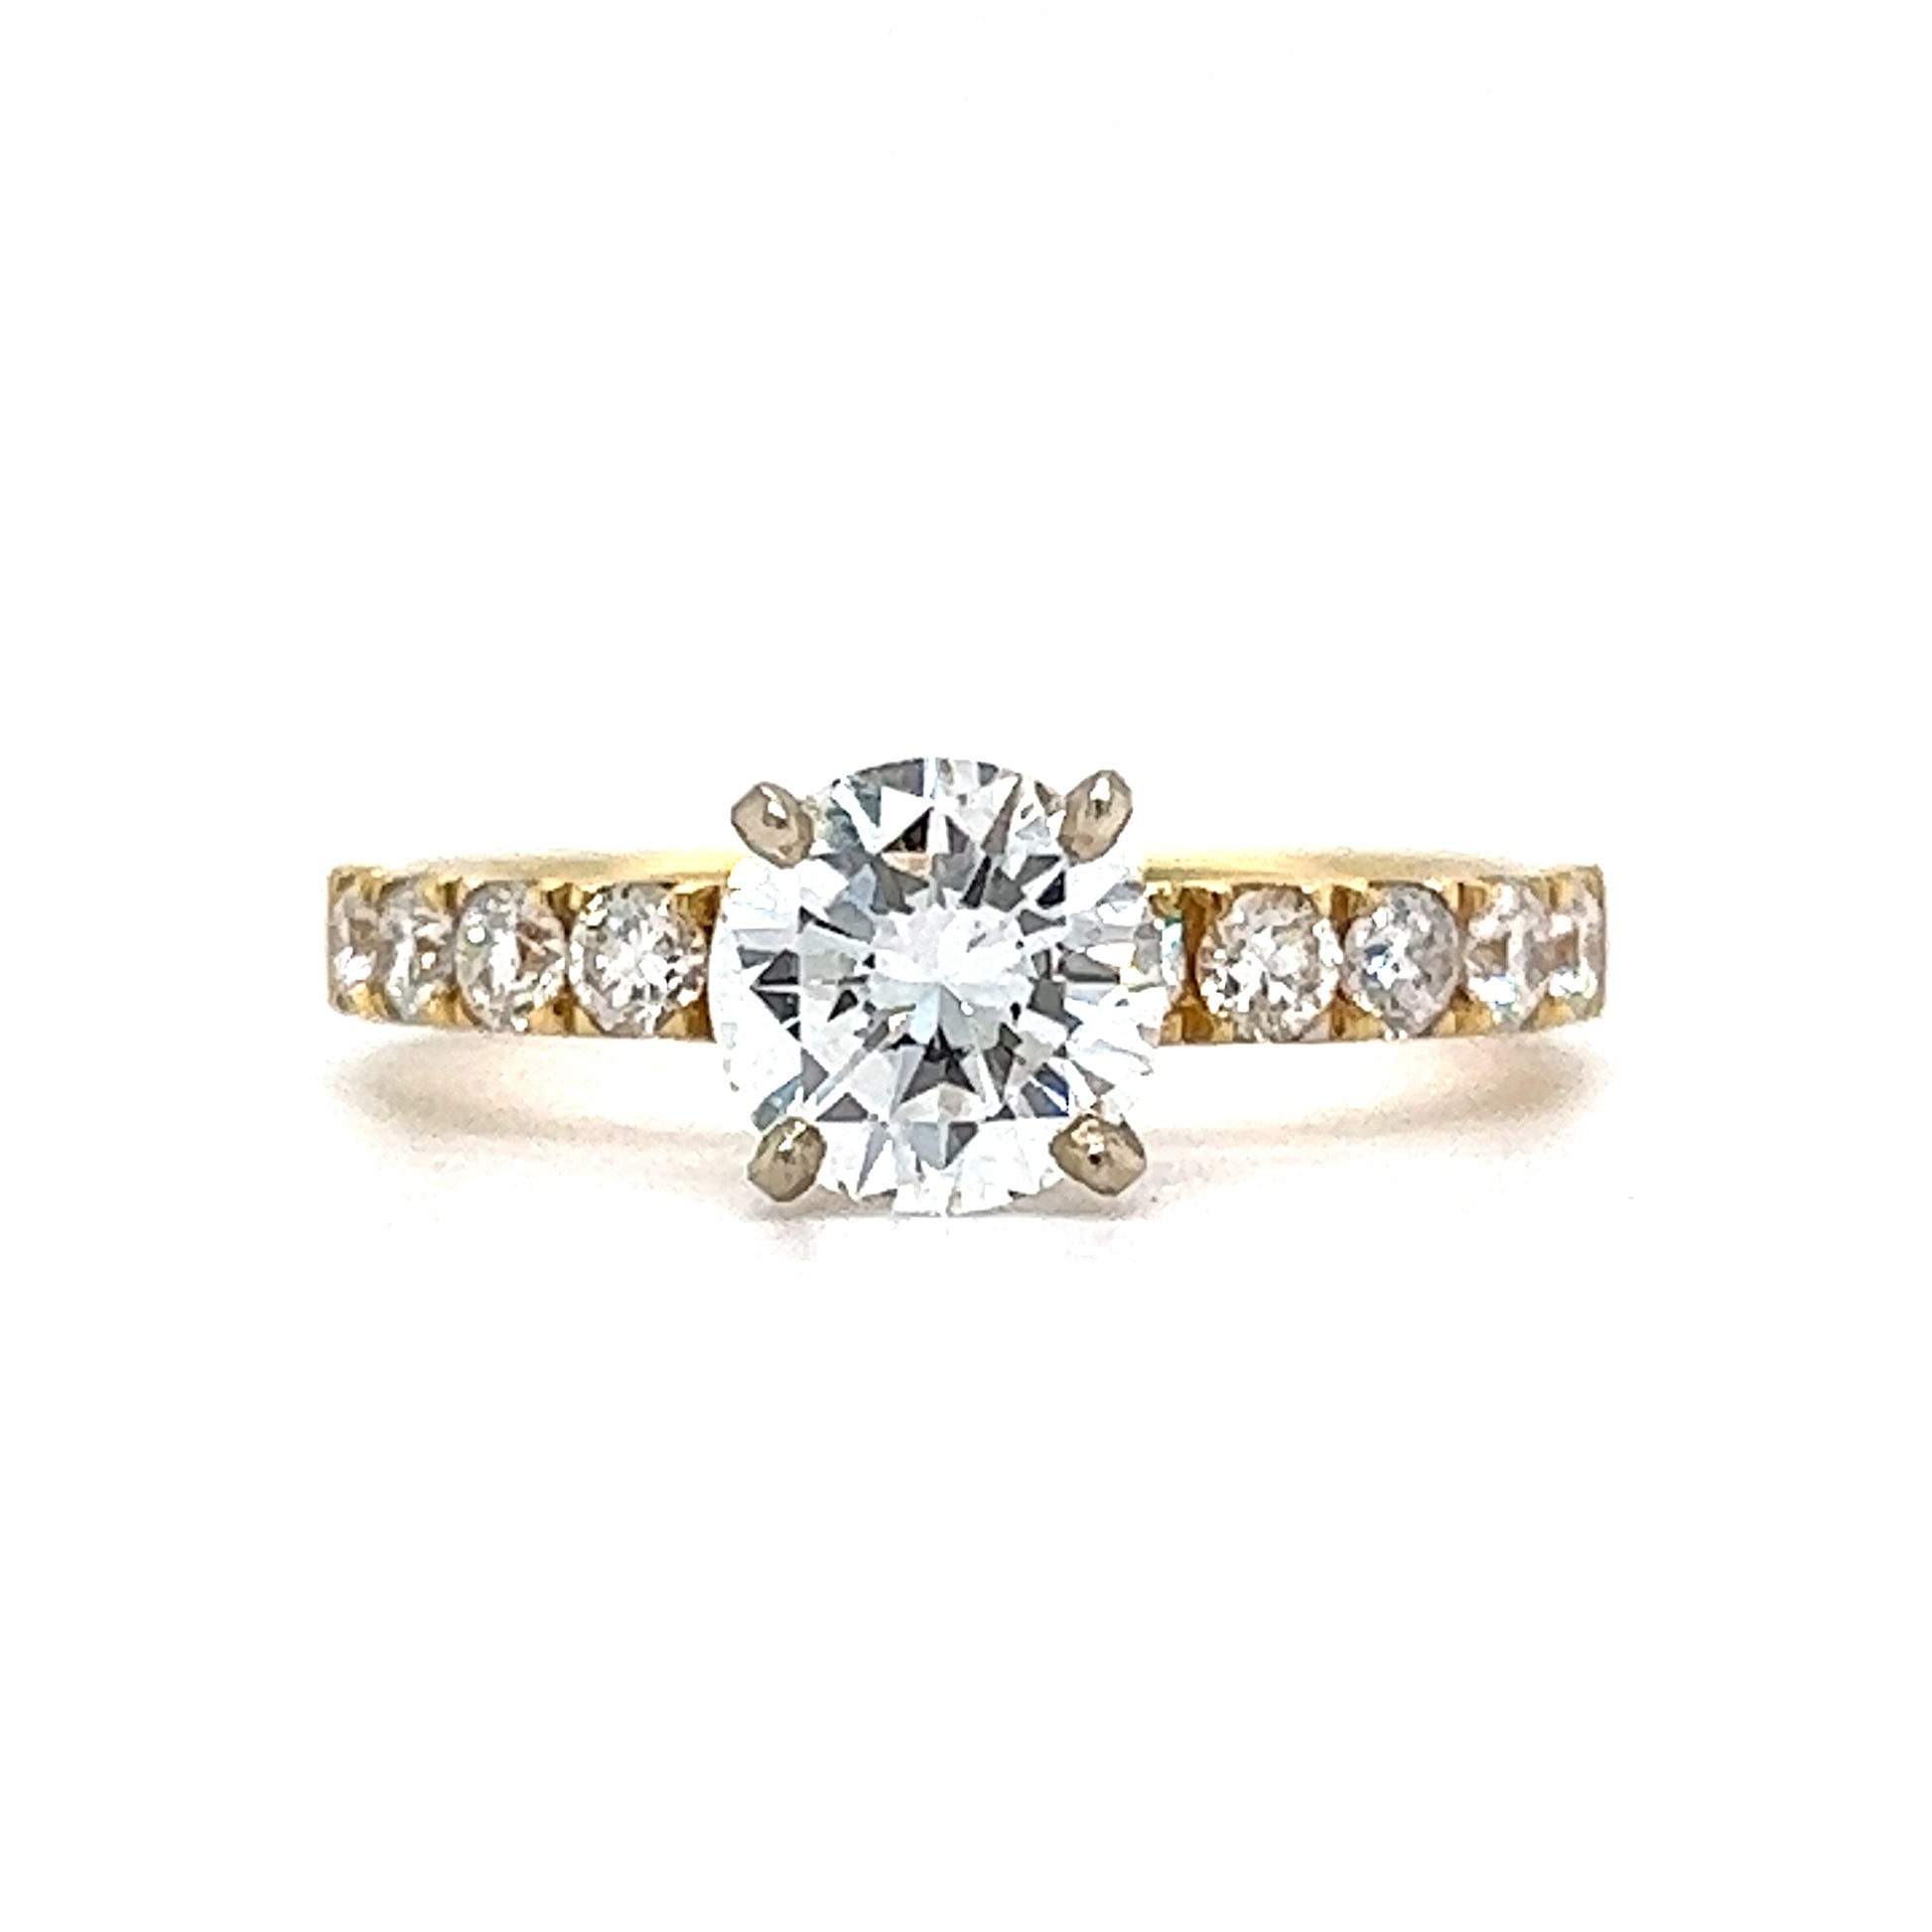 1.06 Solitaire Diamond Engagement Ring in 18k Yellow Gold\